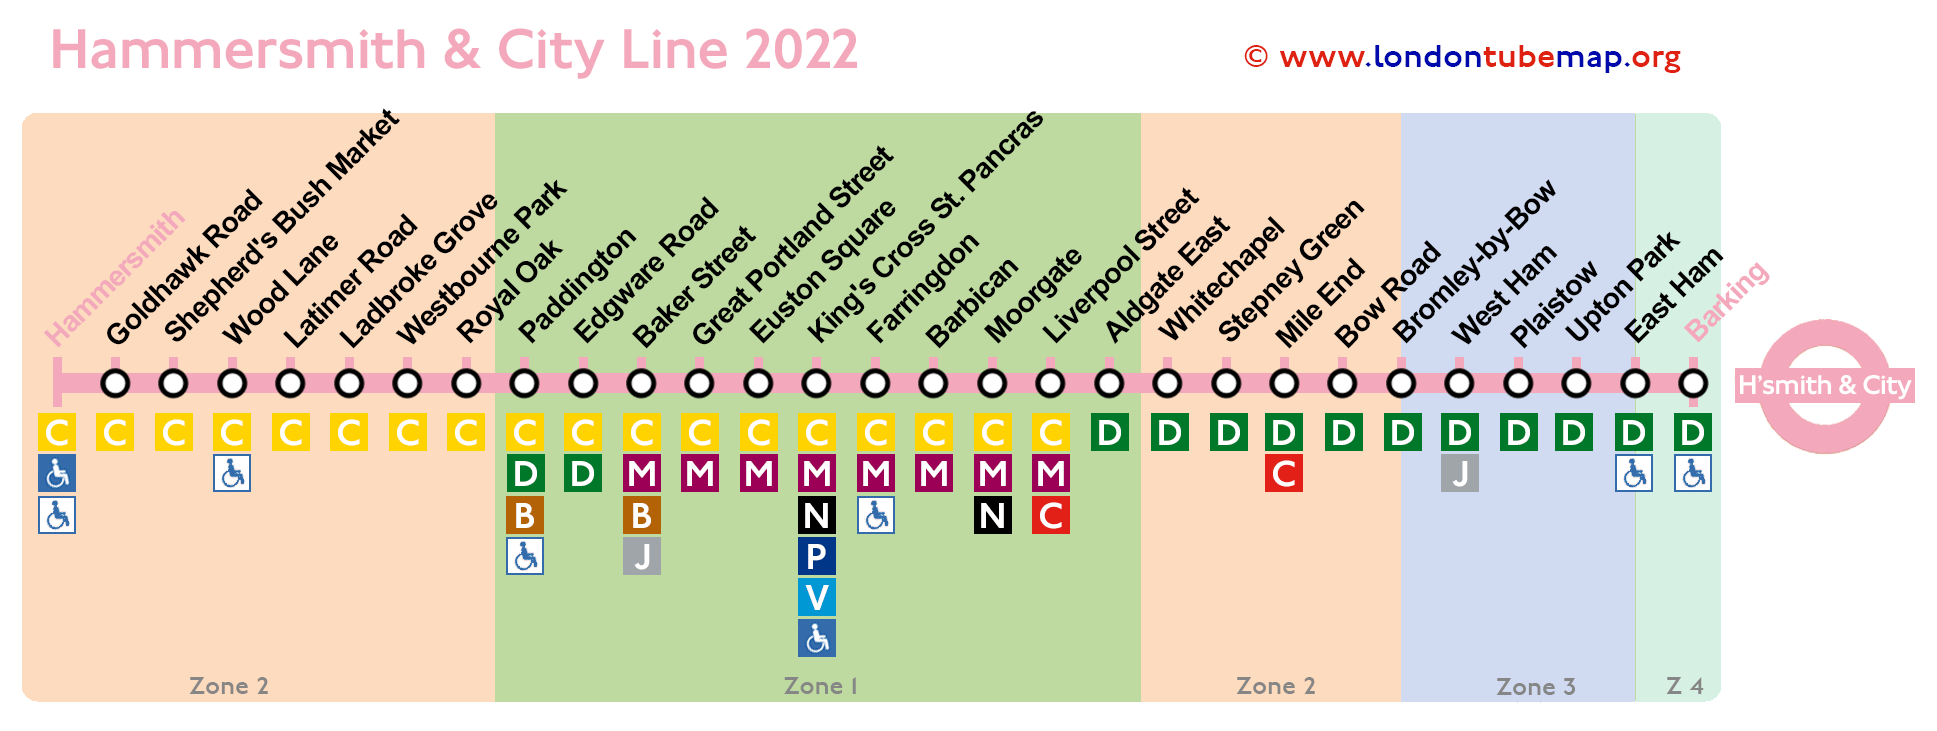 Hammersmith and City line map 2022